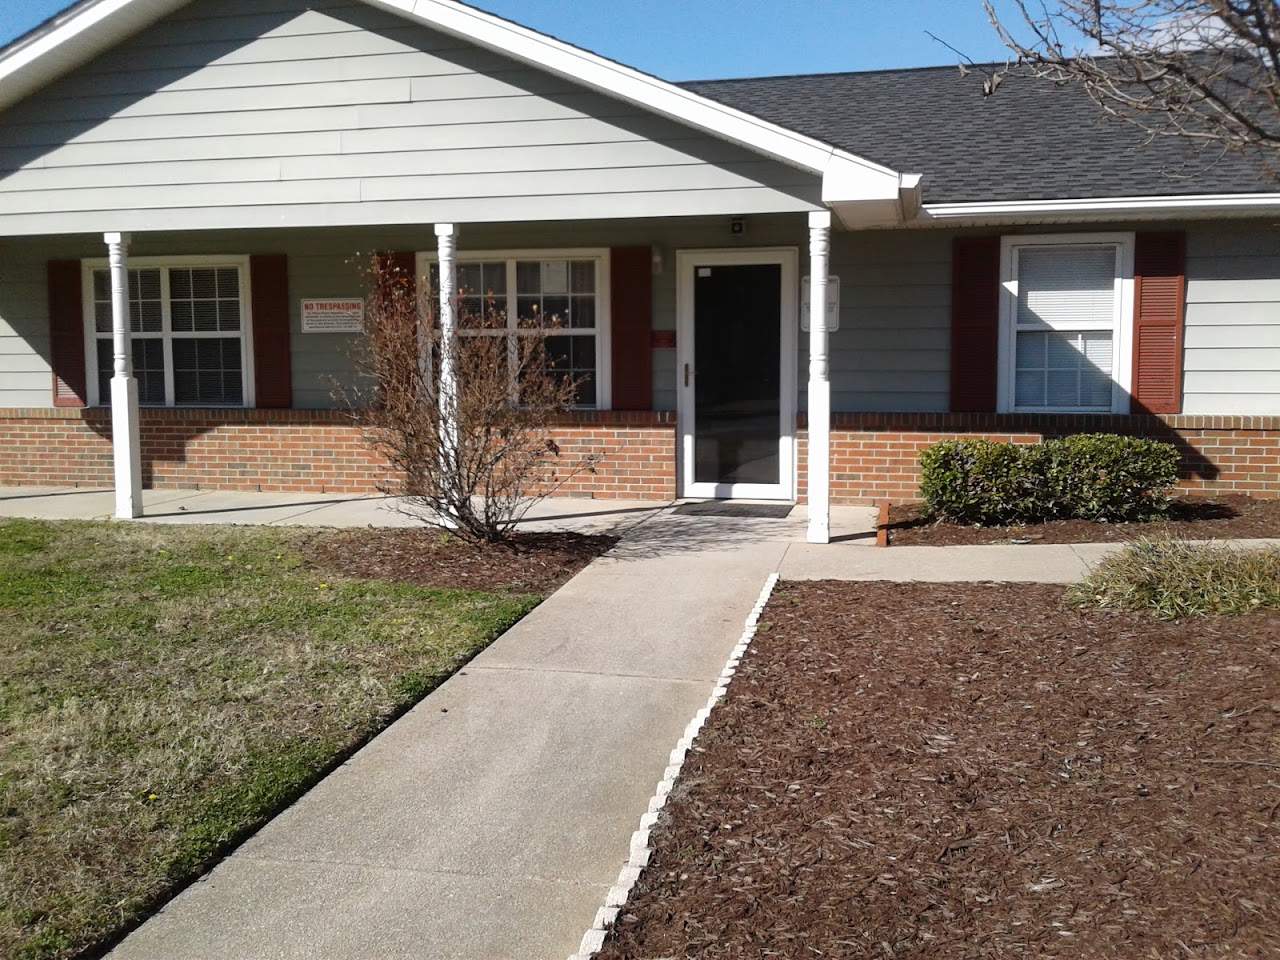 Photo of SOMERSET COURT APTS. Affordable housing located at 1714 LIPSCOMB ROAD WILSON, NC 27893